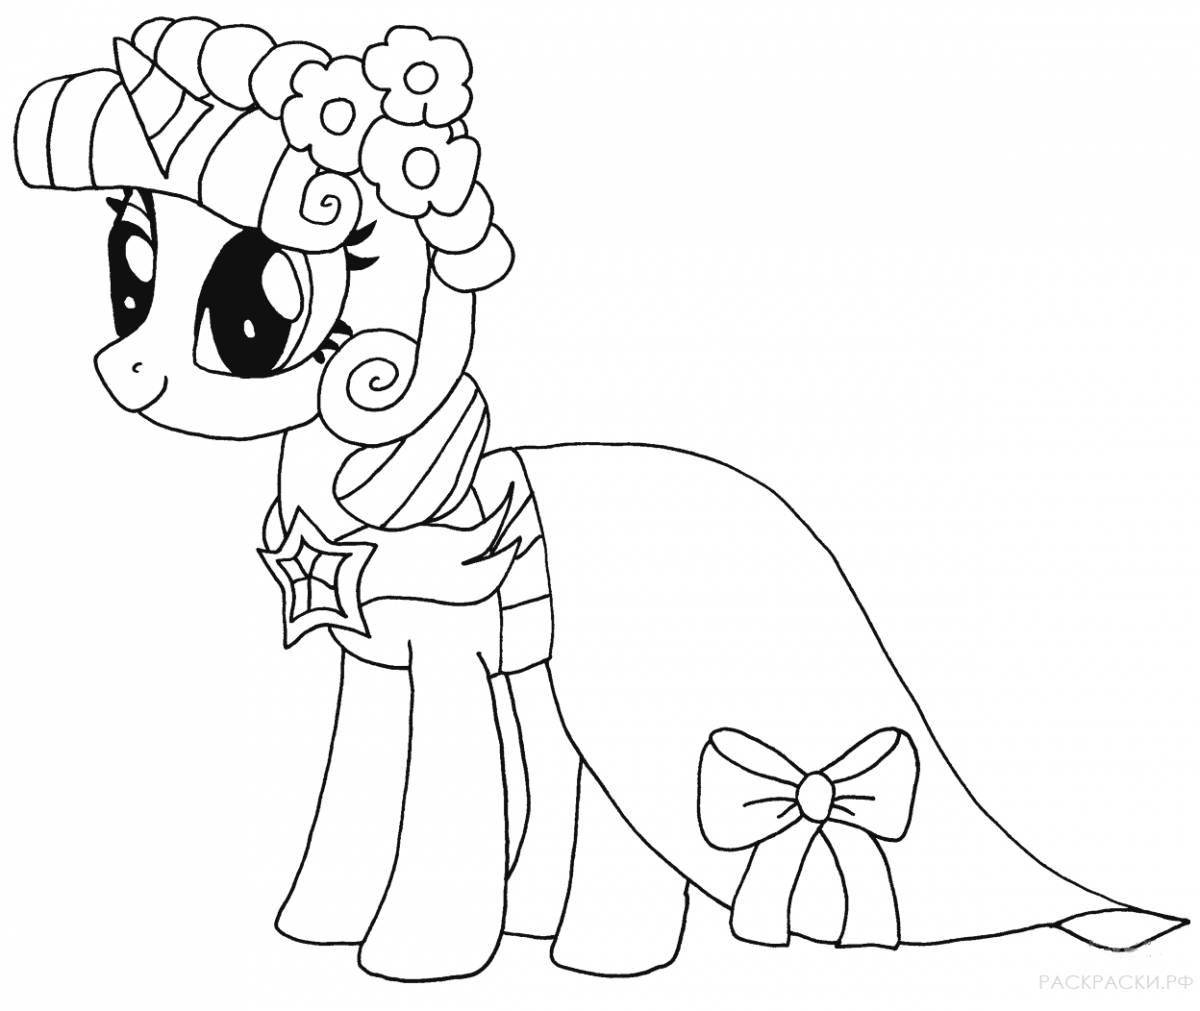 Playful pony coloring